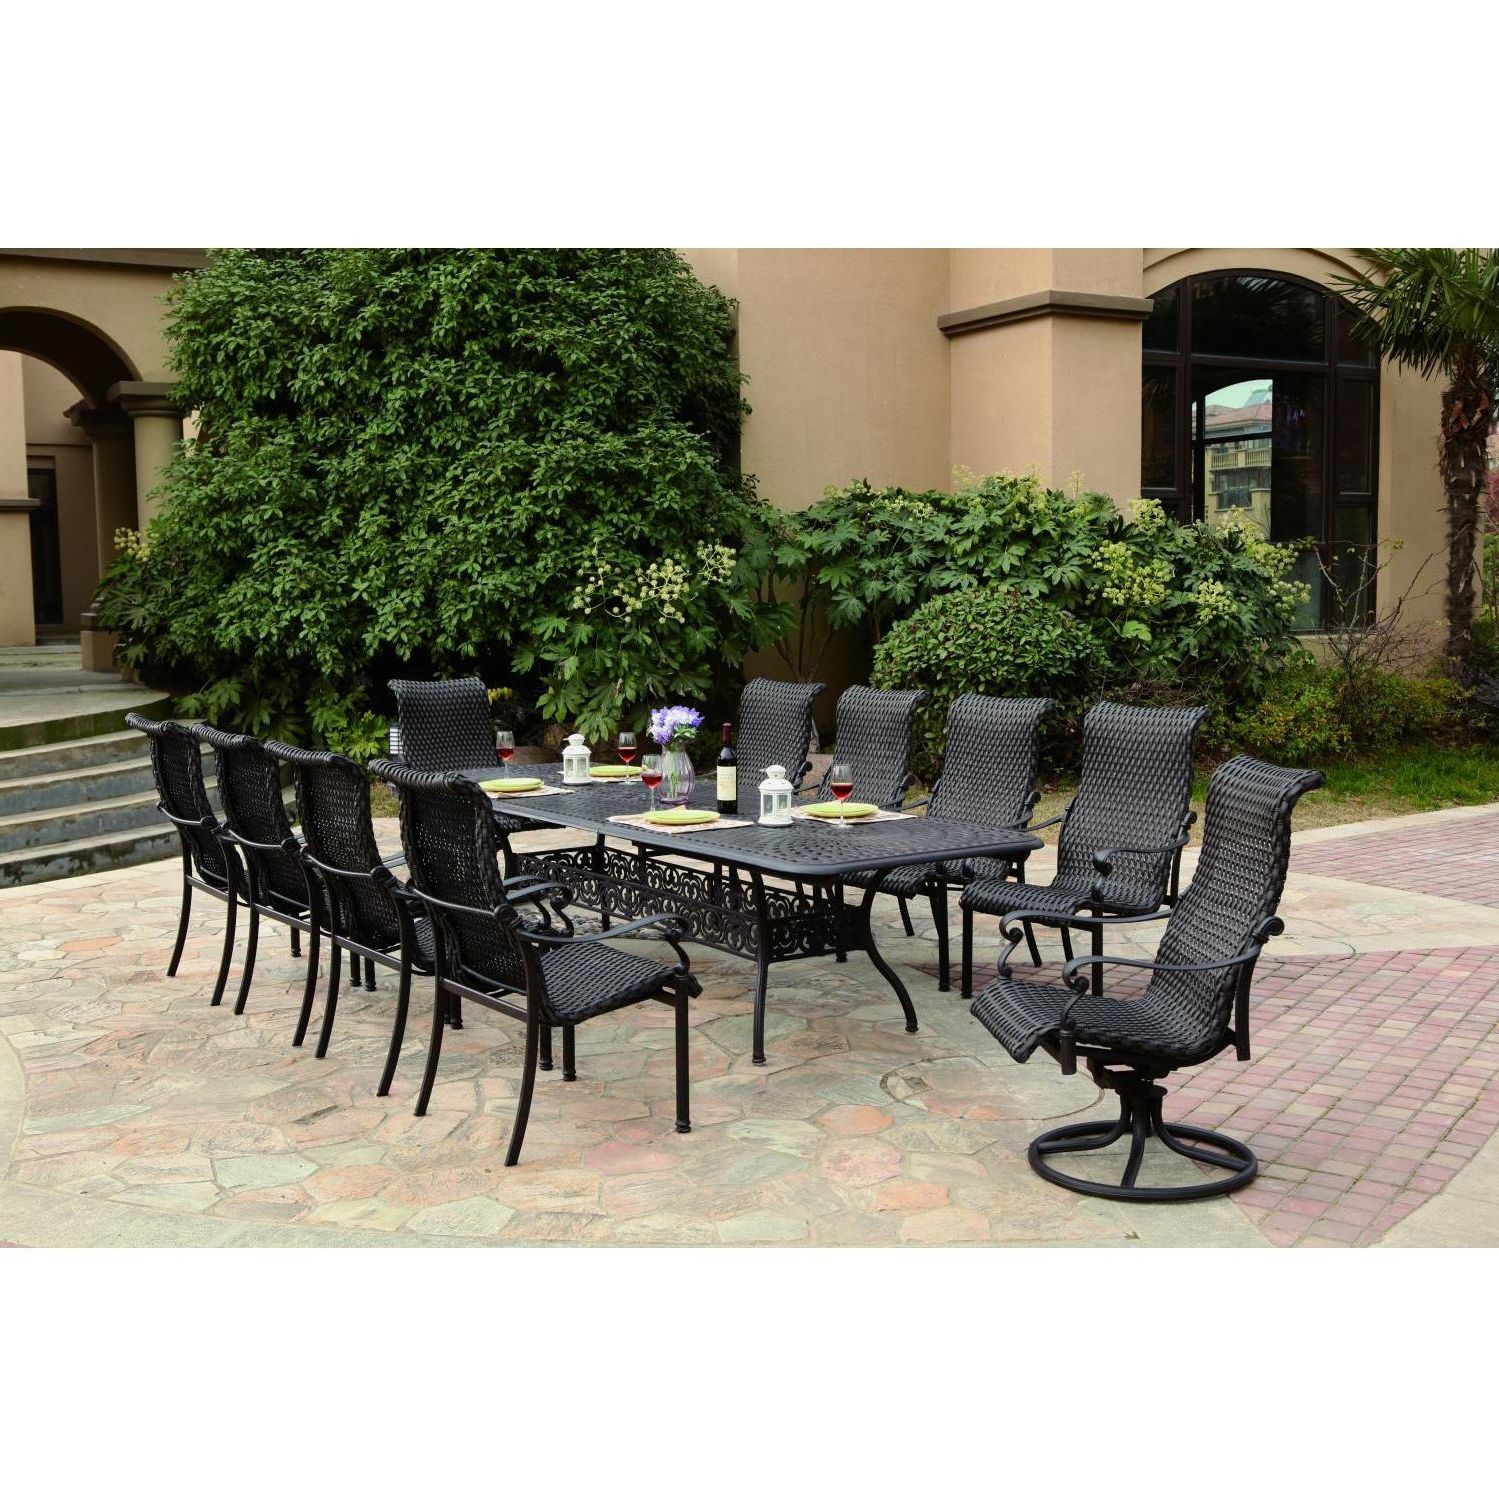 Large Rectangular Patio Dining Sets For Preferred Victoria 11 Piece Resin Wicker Patio Dining Set W/ 92 X 42 Inch (View 14 of 15)